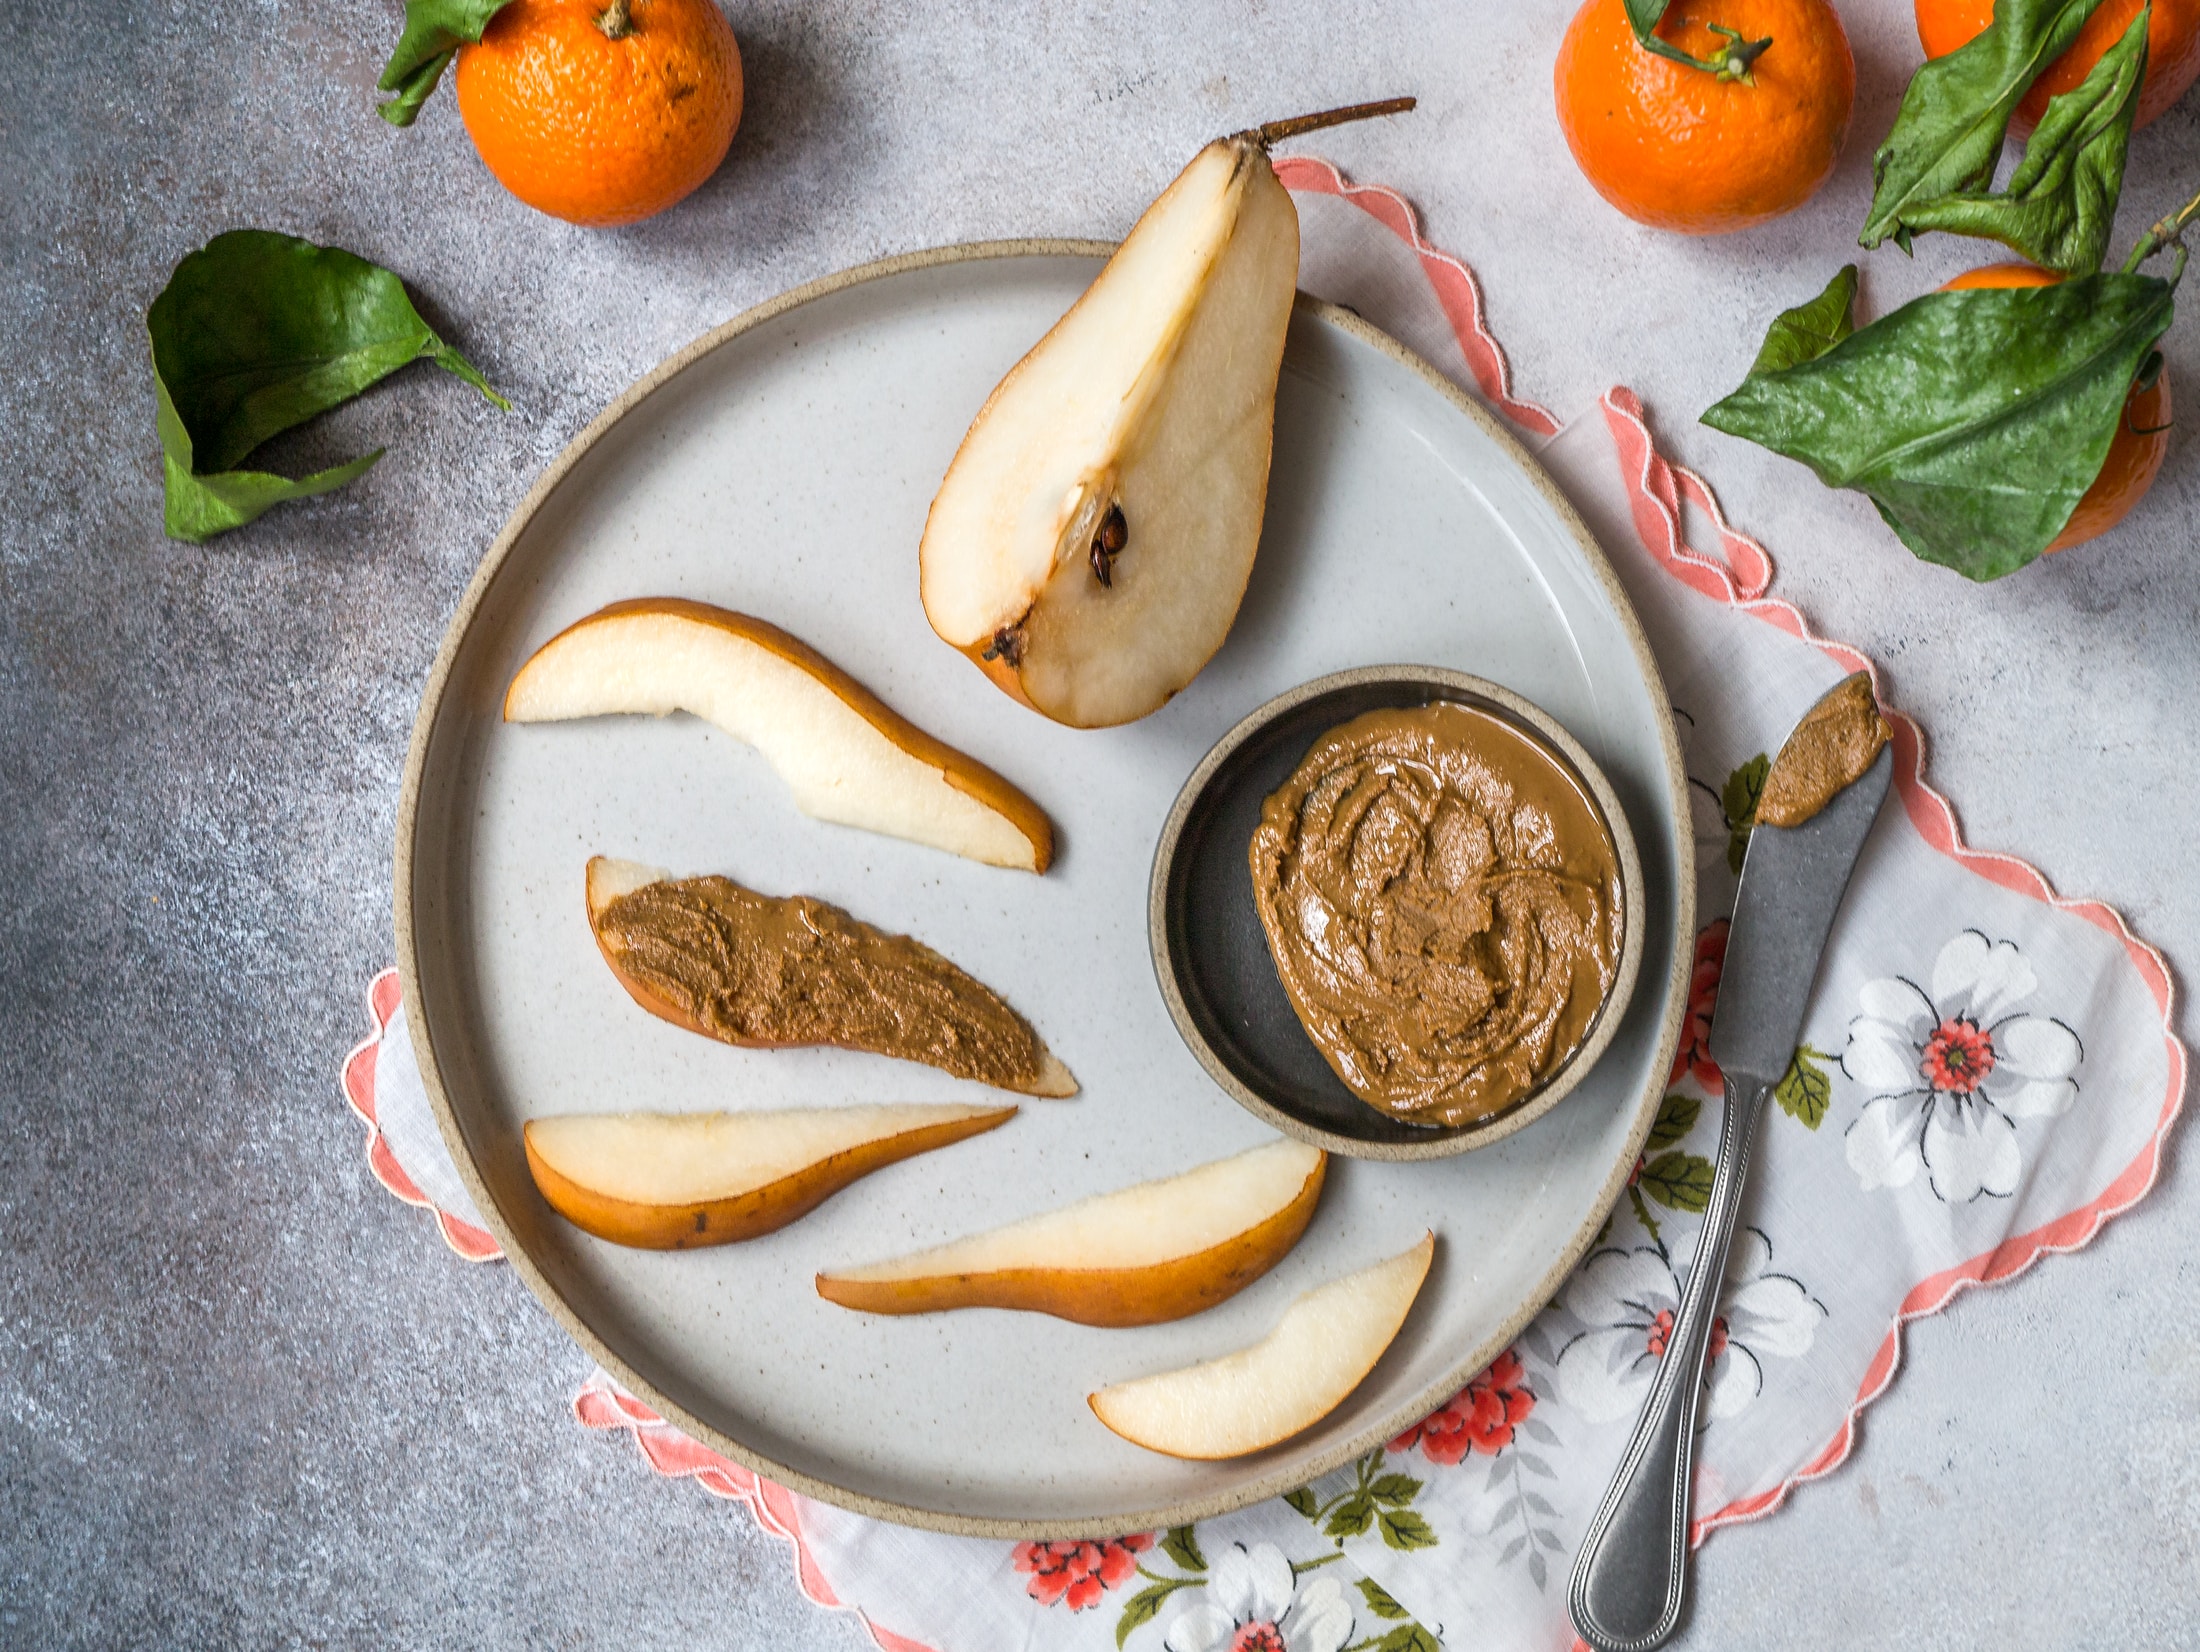 pear and peanut butter on plate